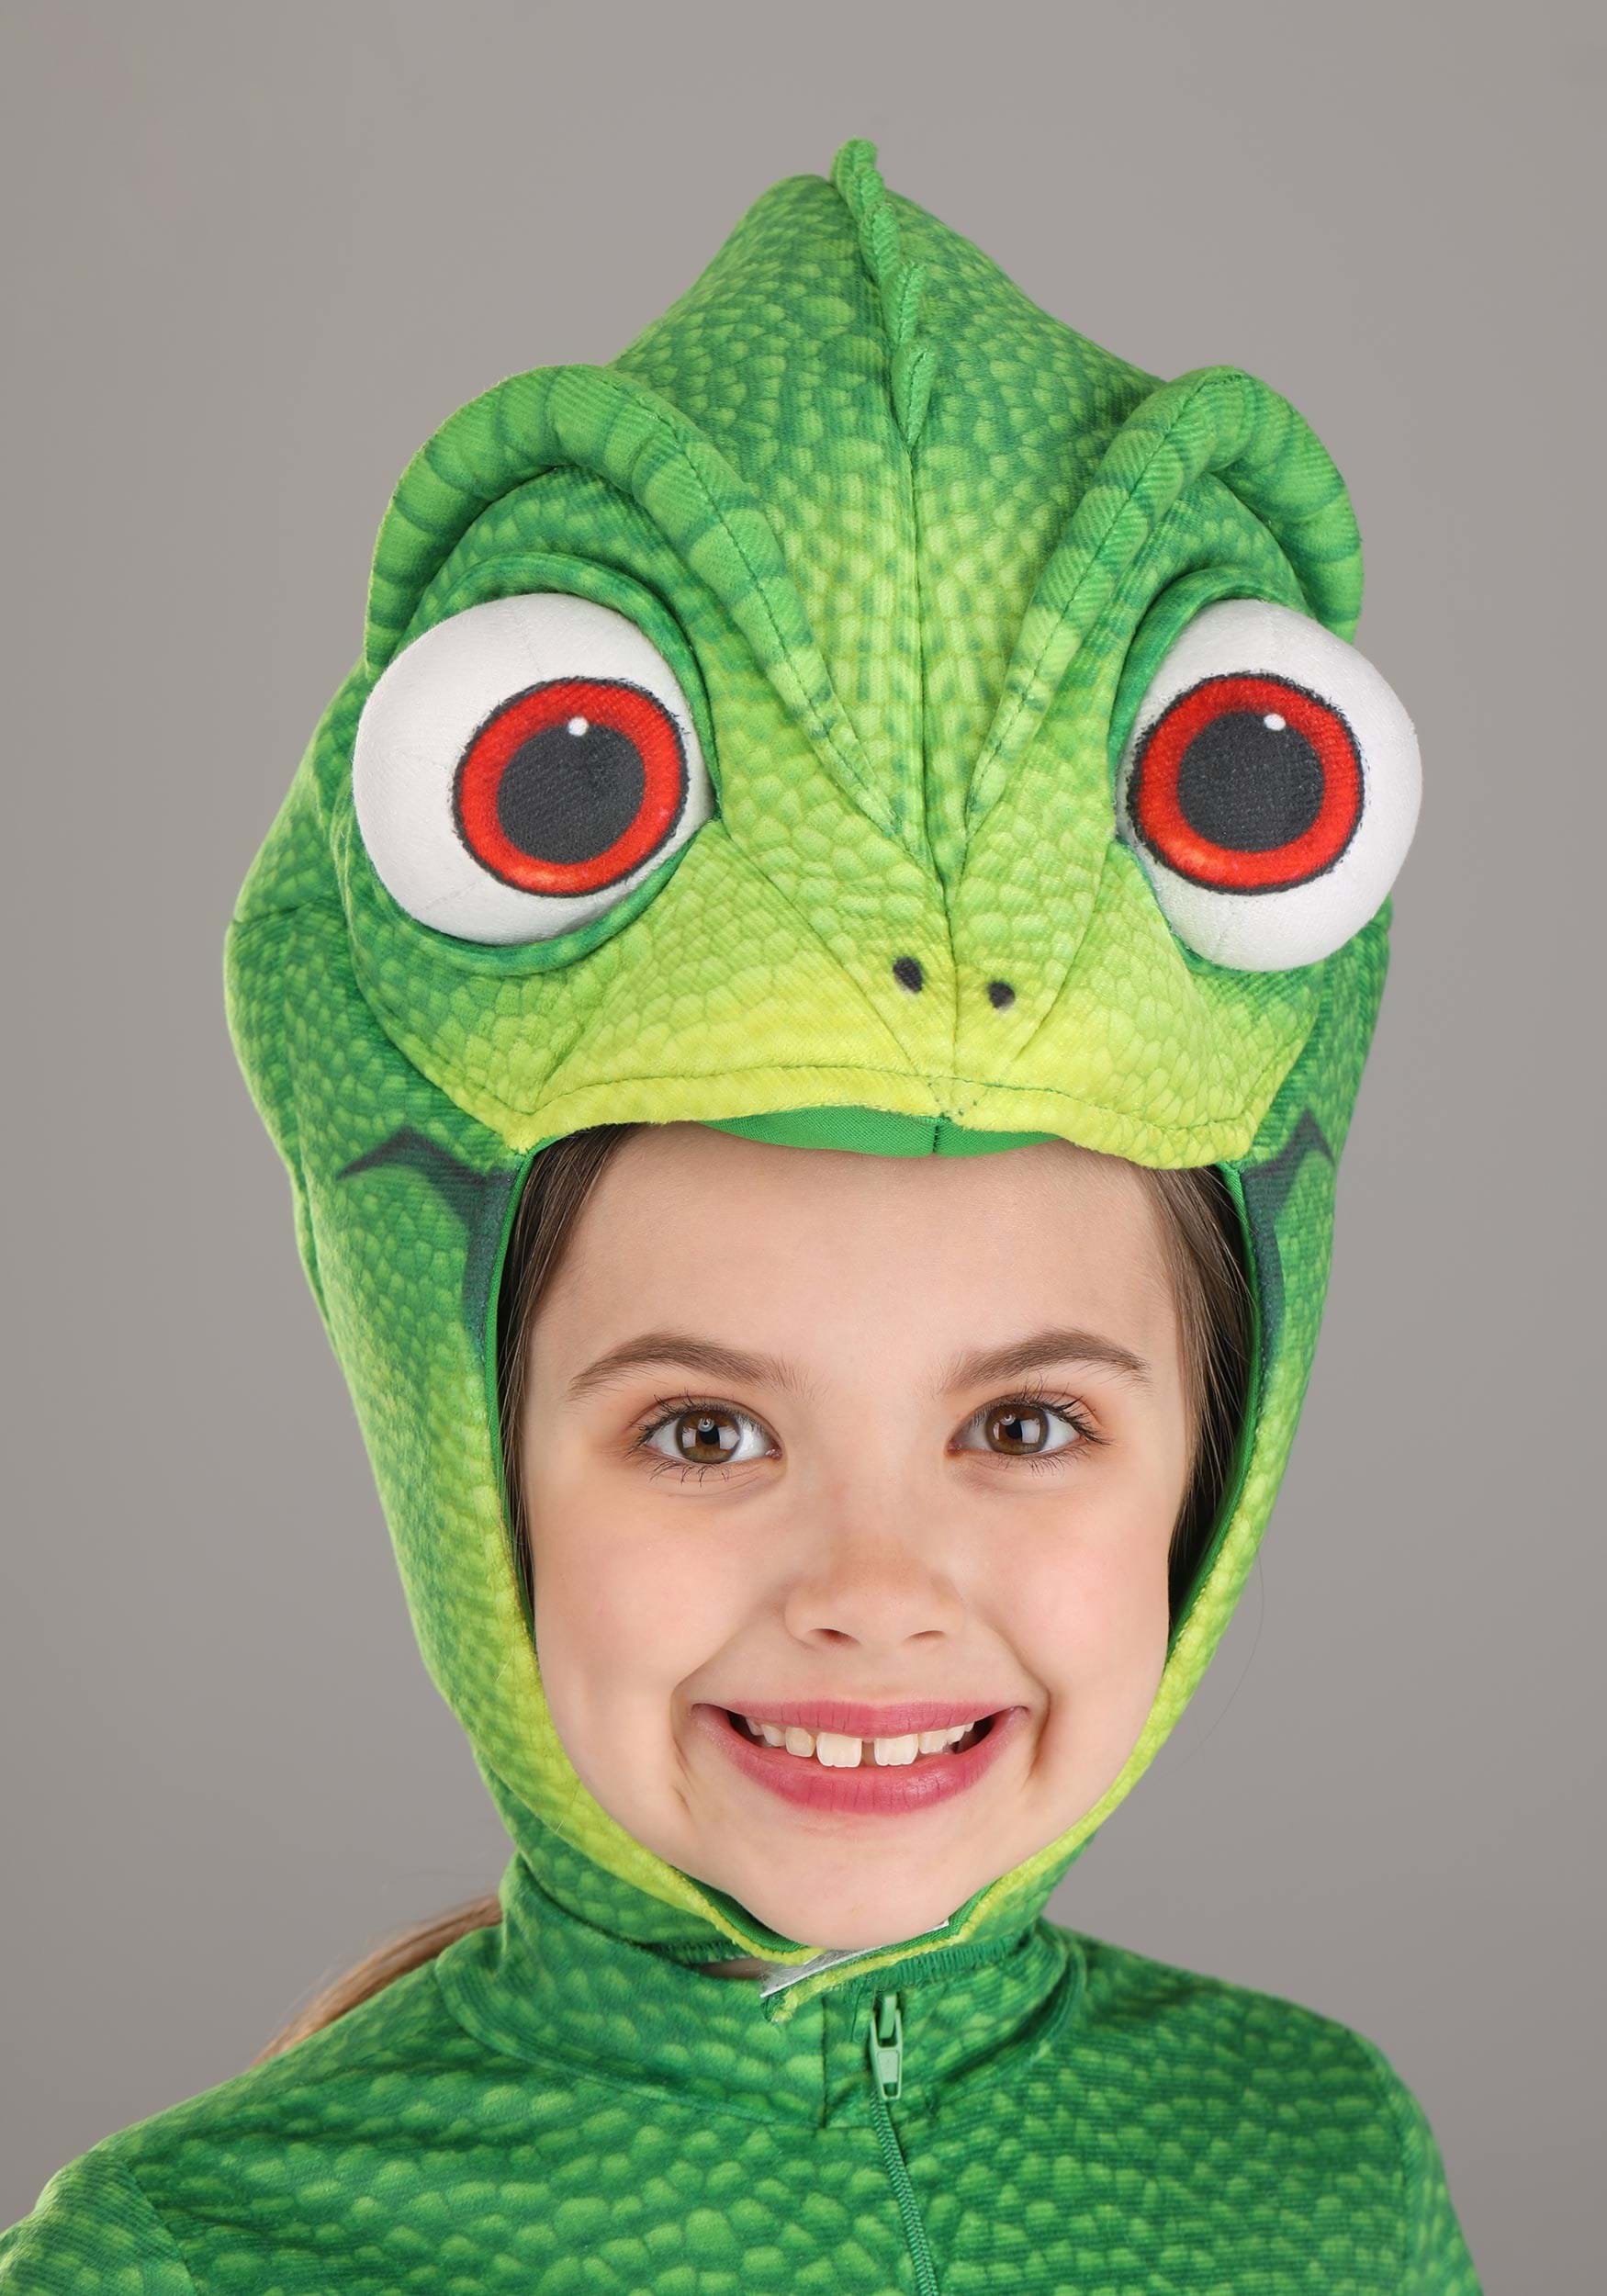 https://images.fun.com/products/68235/2-1-188638/kids-tangled-pascal-costume-alt-5.jpg